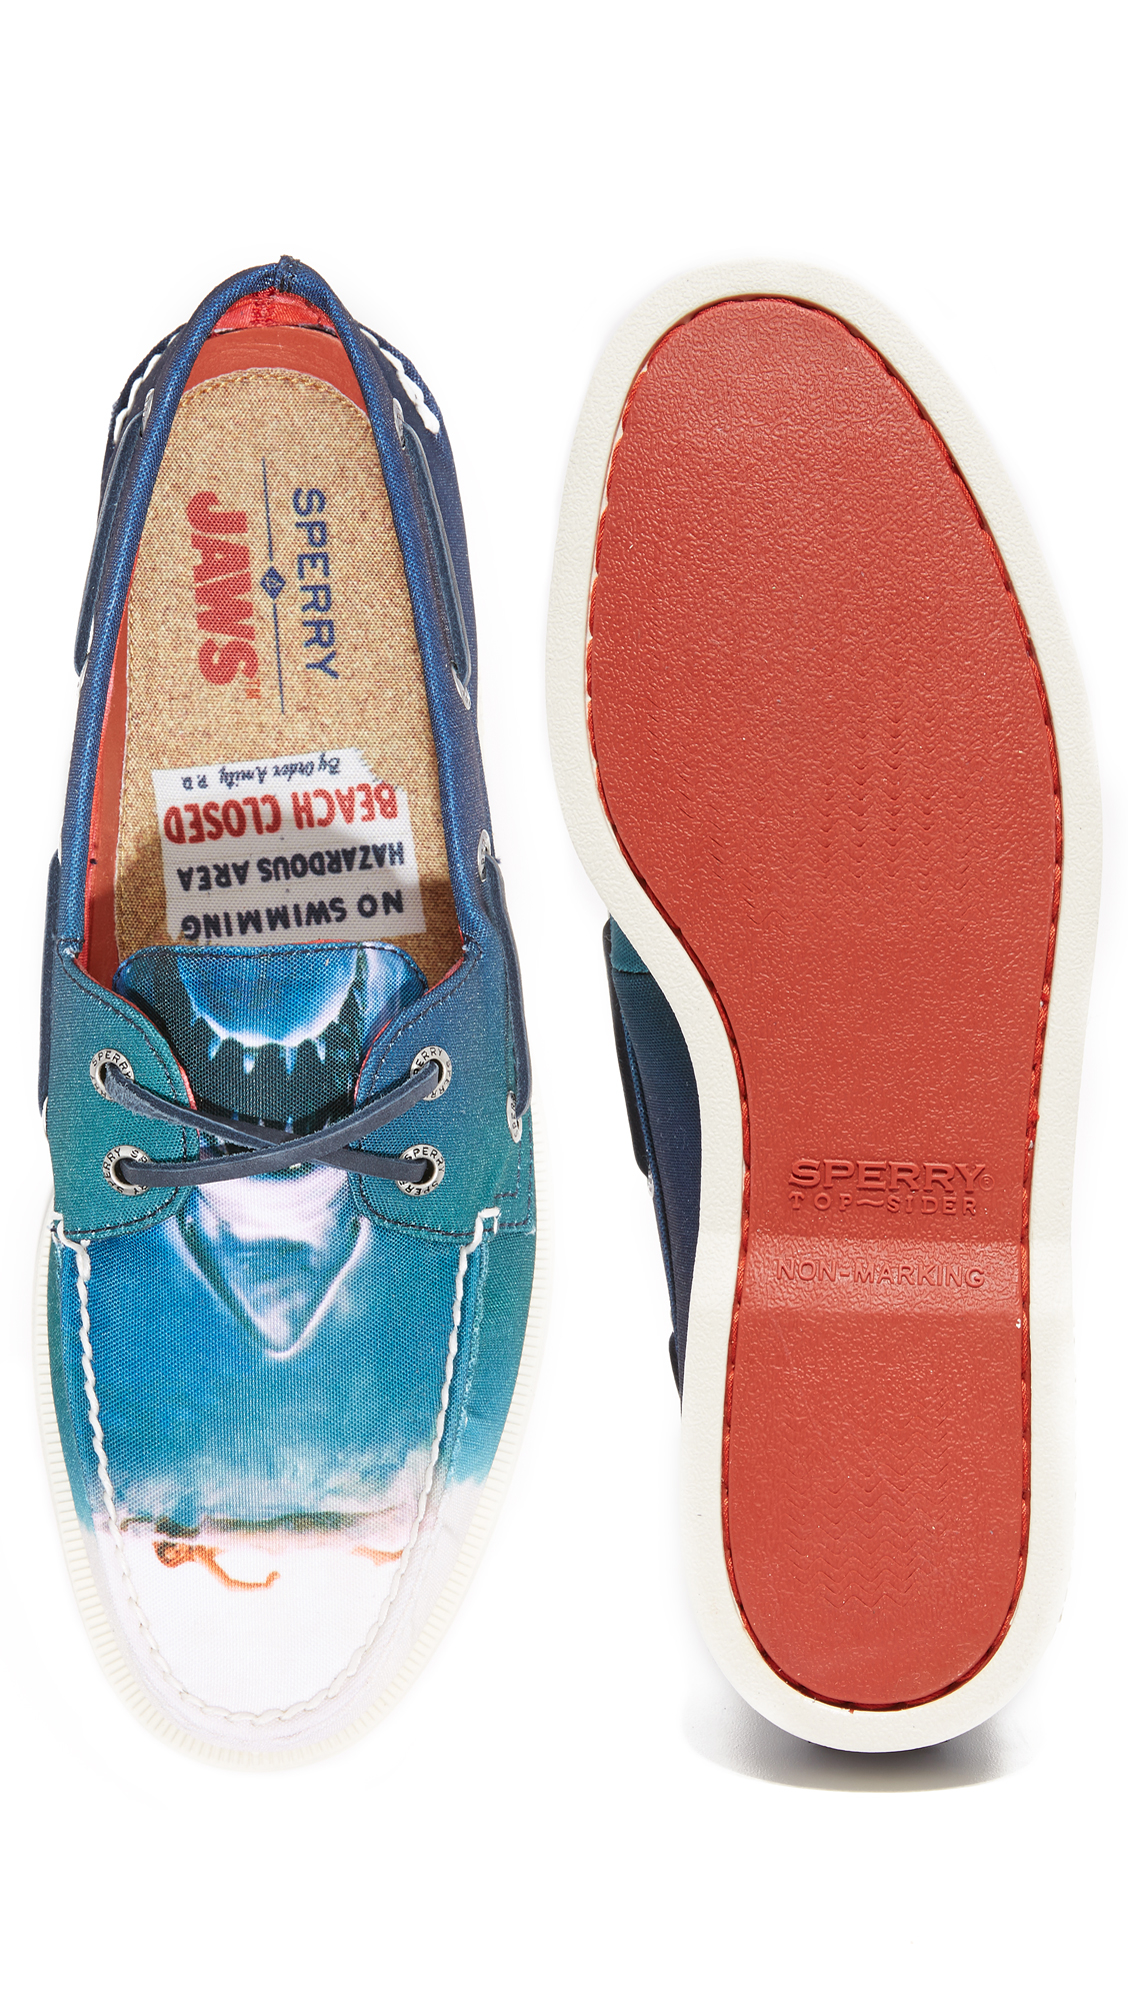 Jaws slippers - 28 images - sperry teams up with universal 